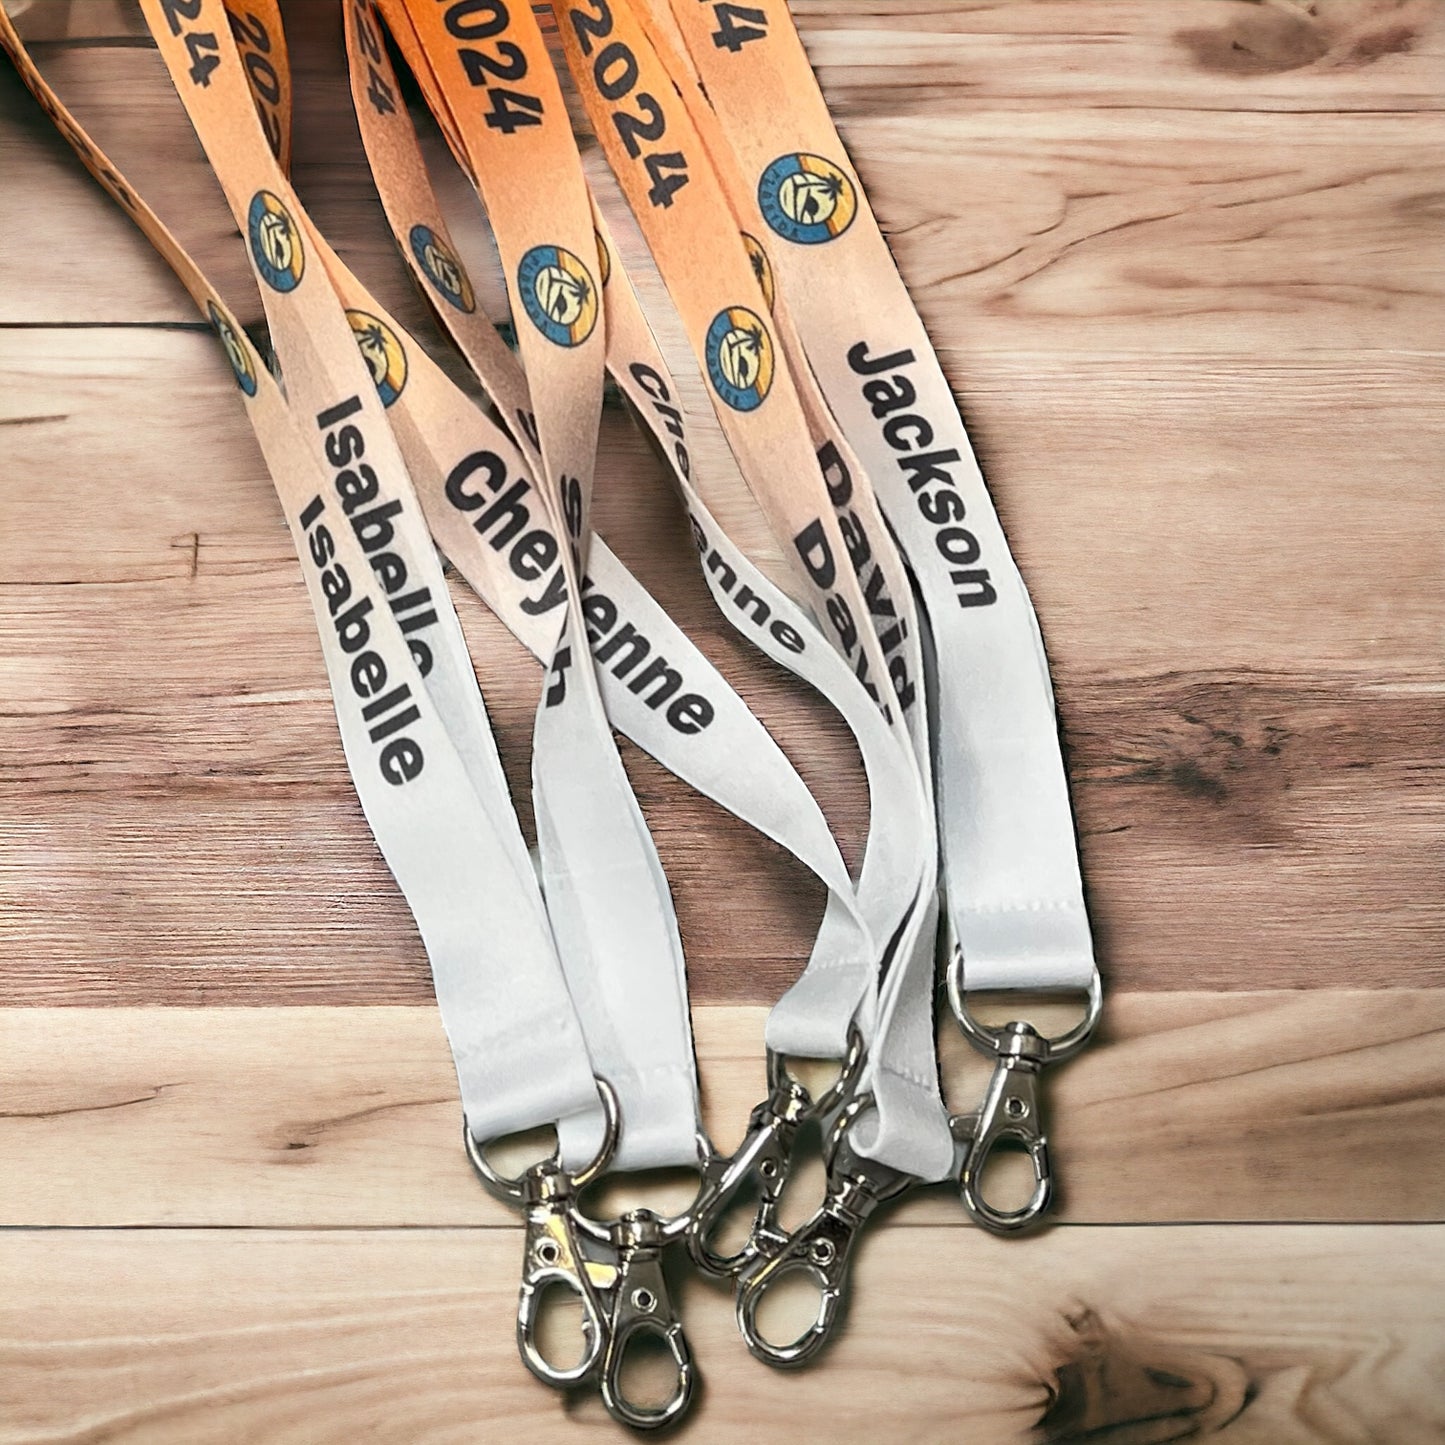 Customized Business Logo Promotional Event Lanyards - Personalized Convention Badge Holders - Bulk Discounts Available